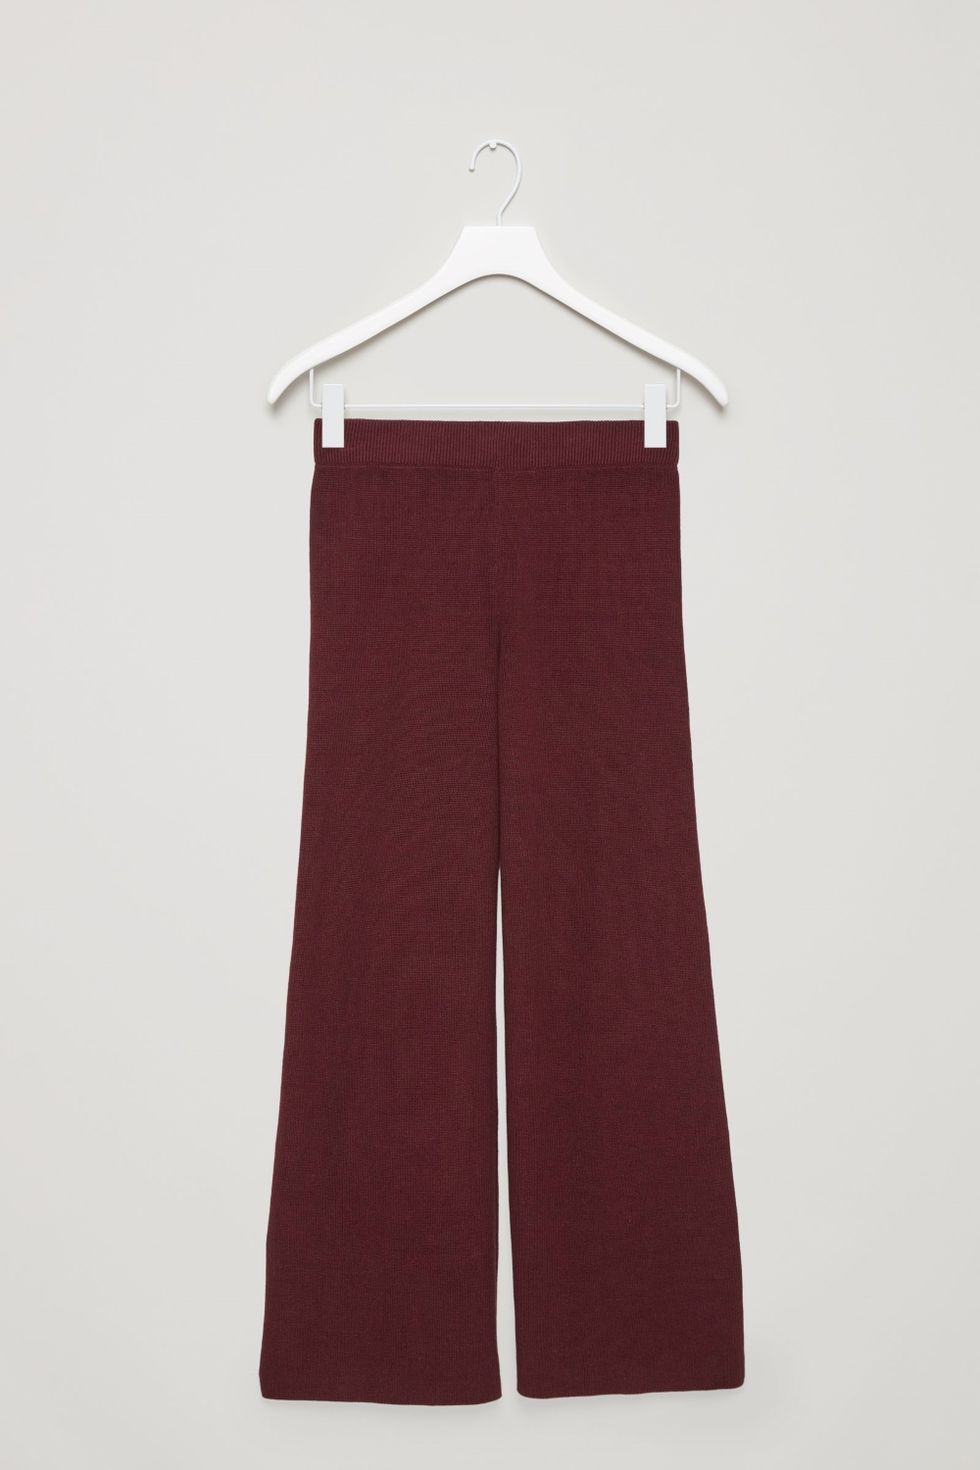 Clothing, Red, Maroon, Clothes hanger, Trousers, Outerwear, 